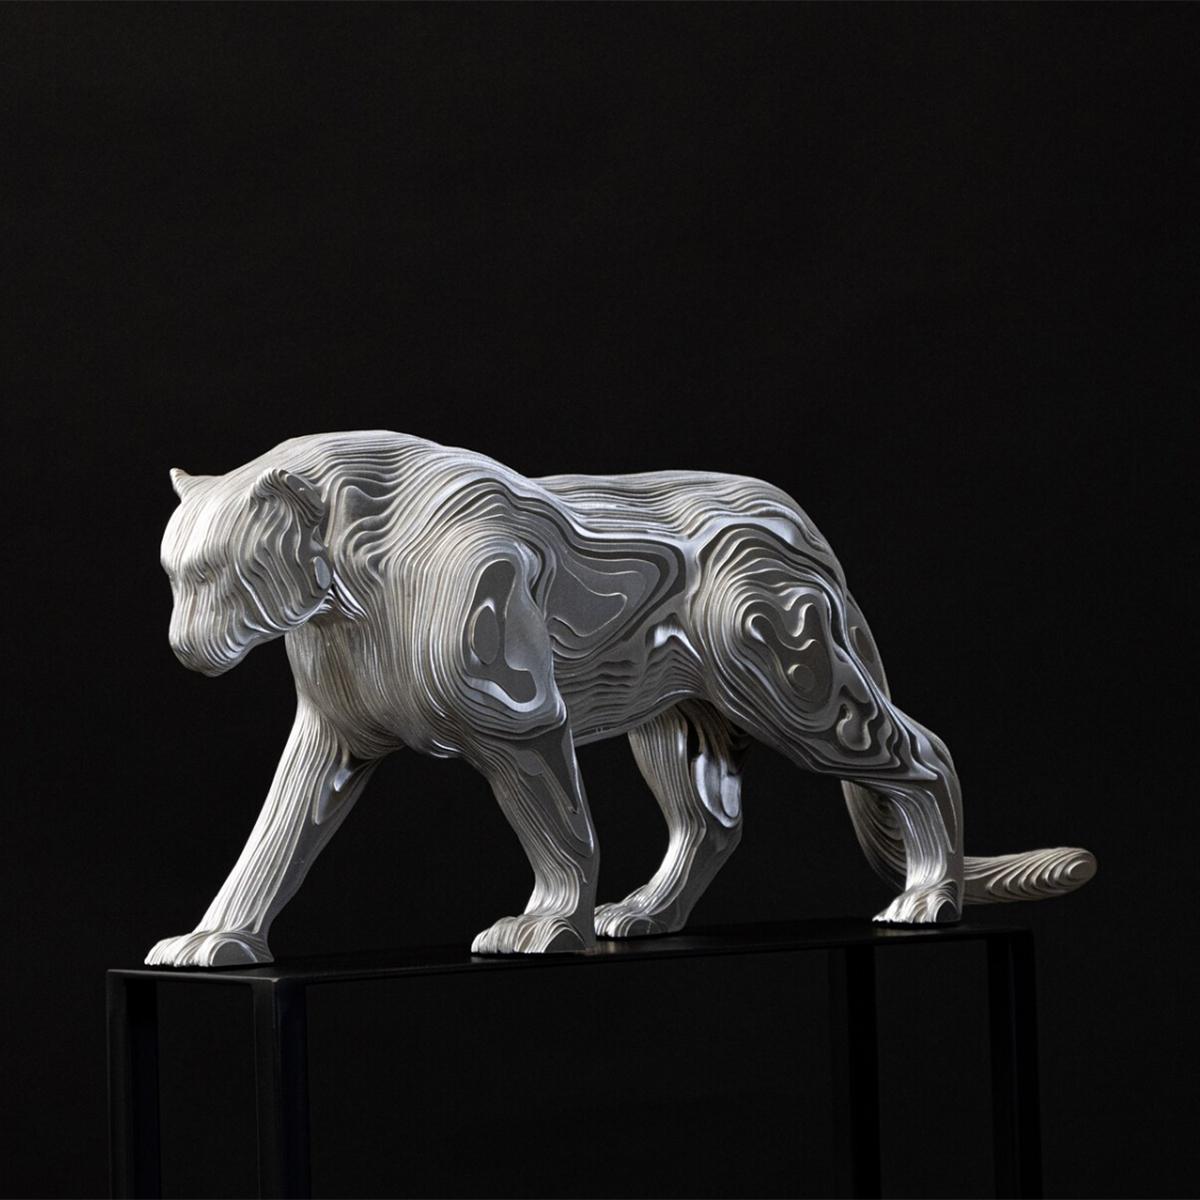 Sculpture panther polished medium made with 
aluminium hand-crafted plates. Edition of 8 pieces 
made in welded and shaped aluminium into masterful 
works of contemporary art.